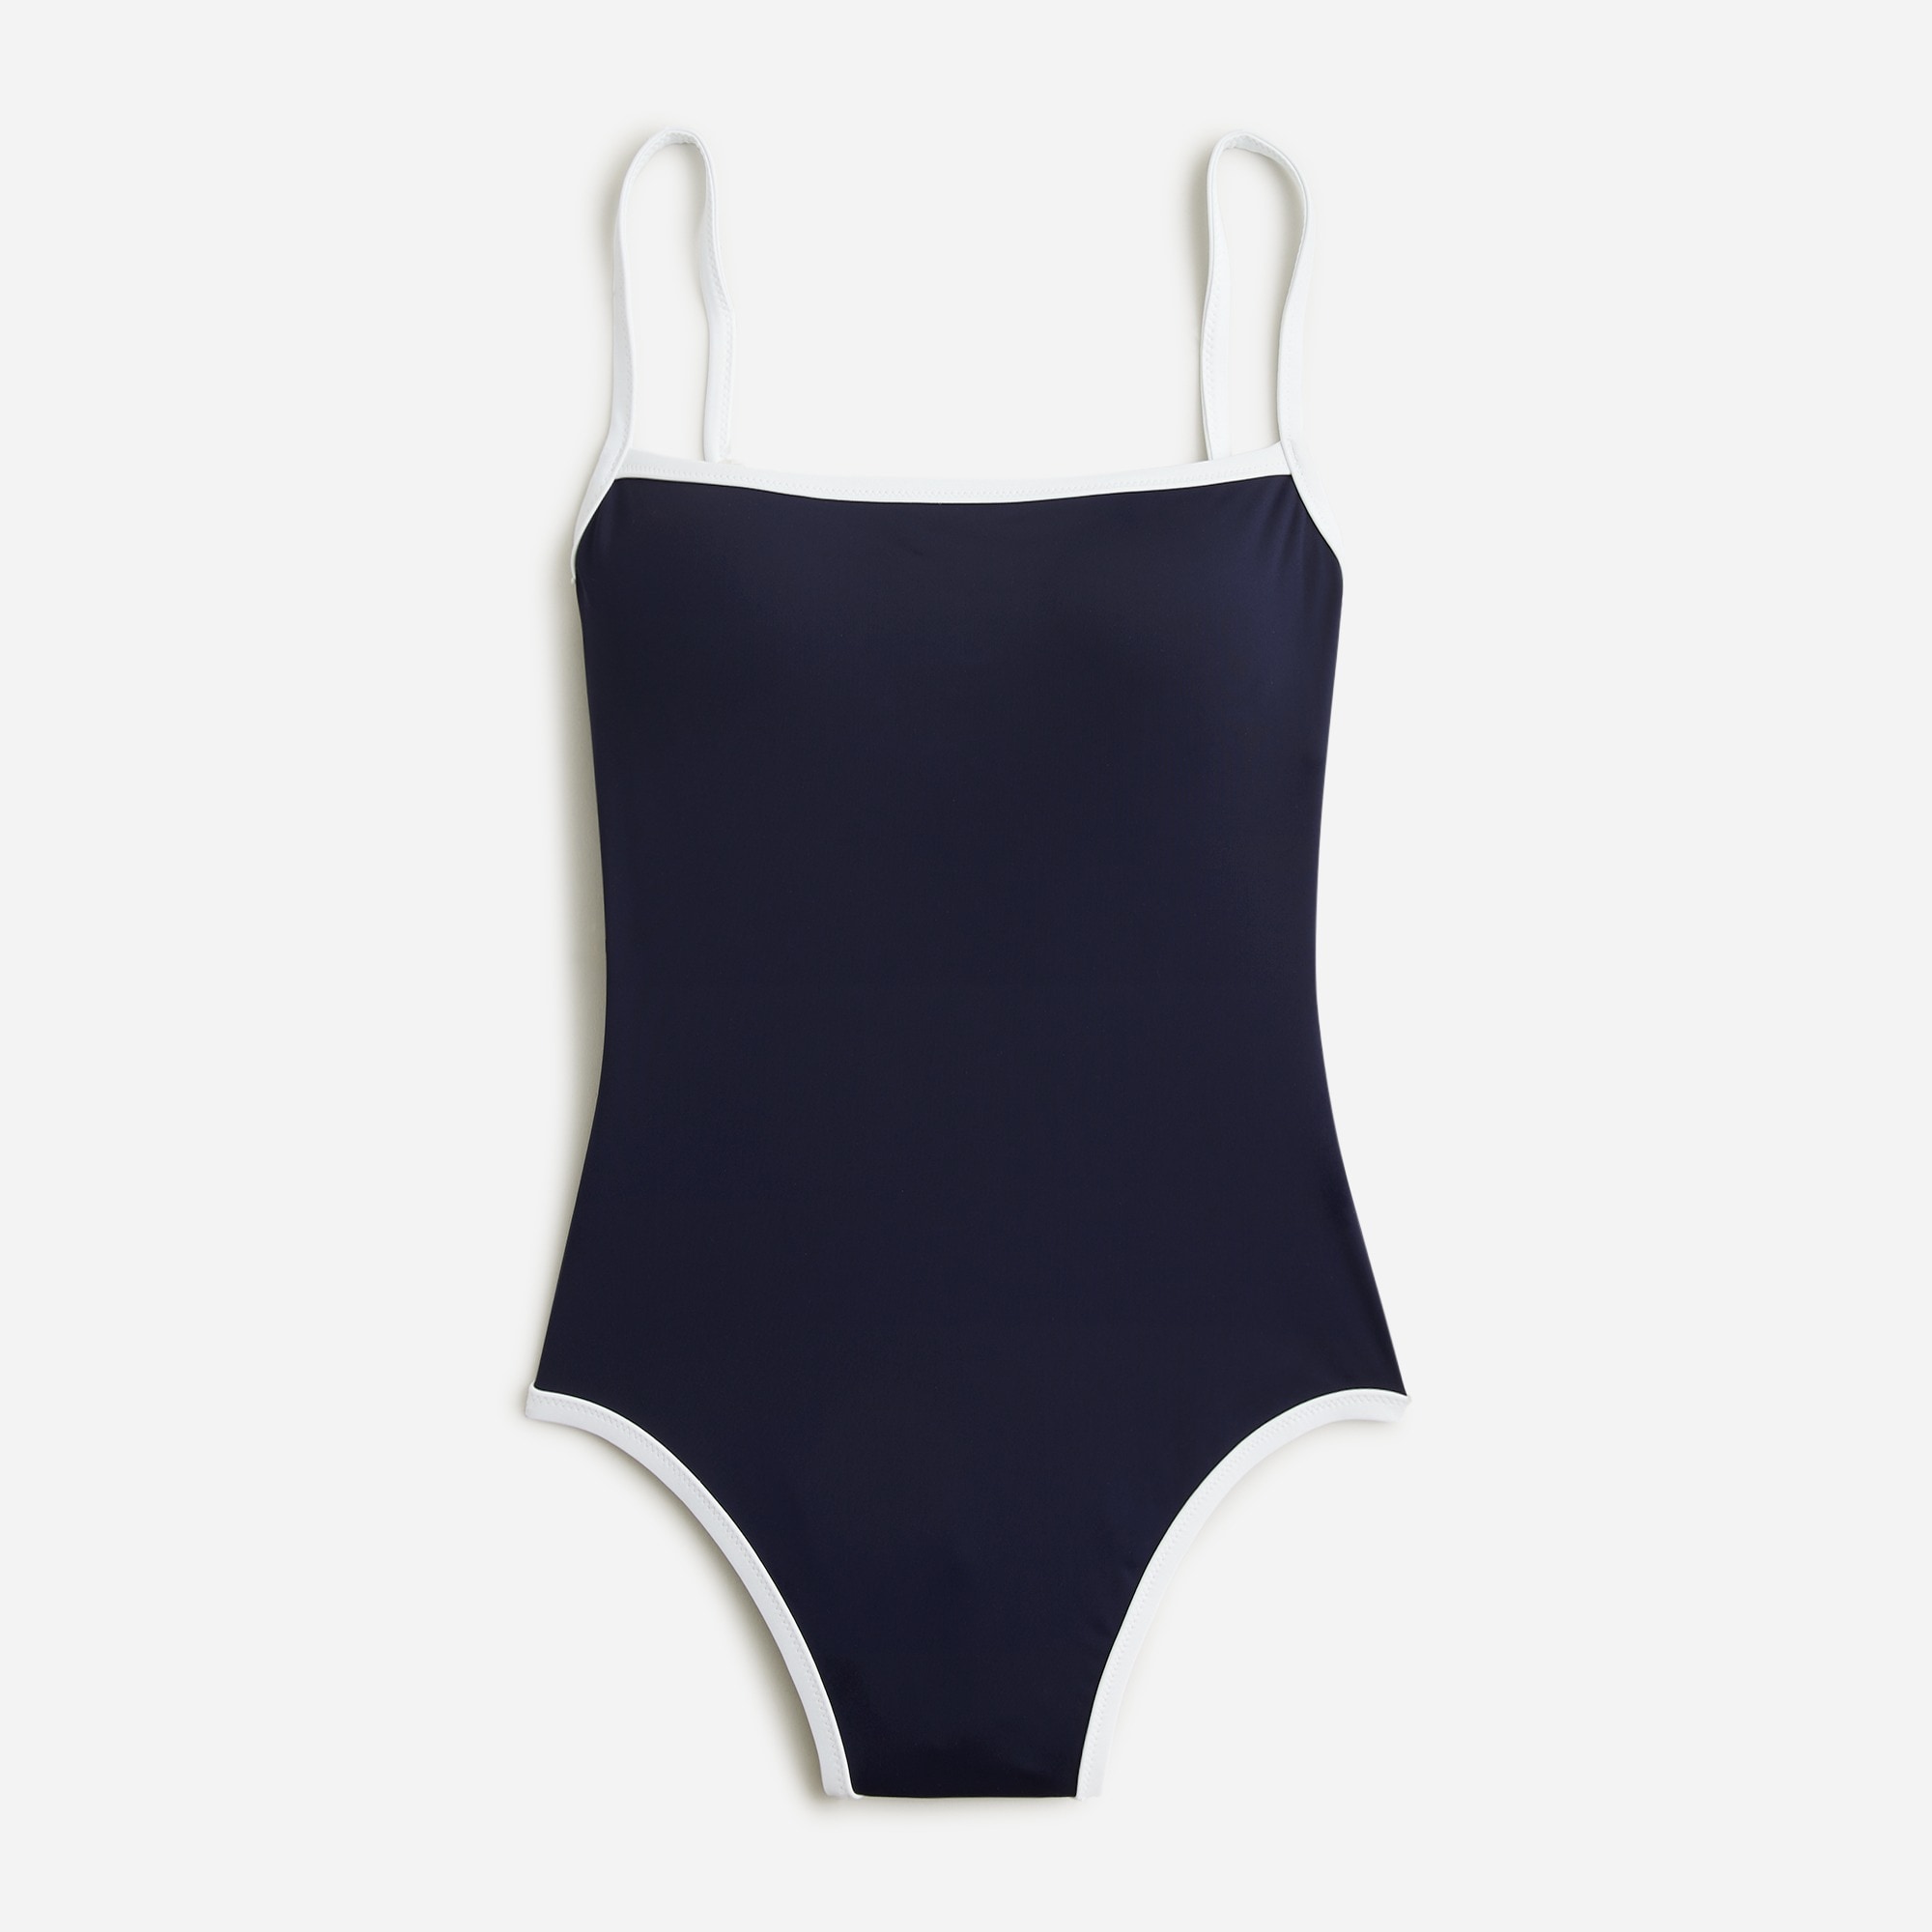  Squareneck one-piece swimsuit with contrast trim